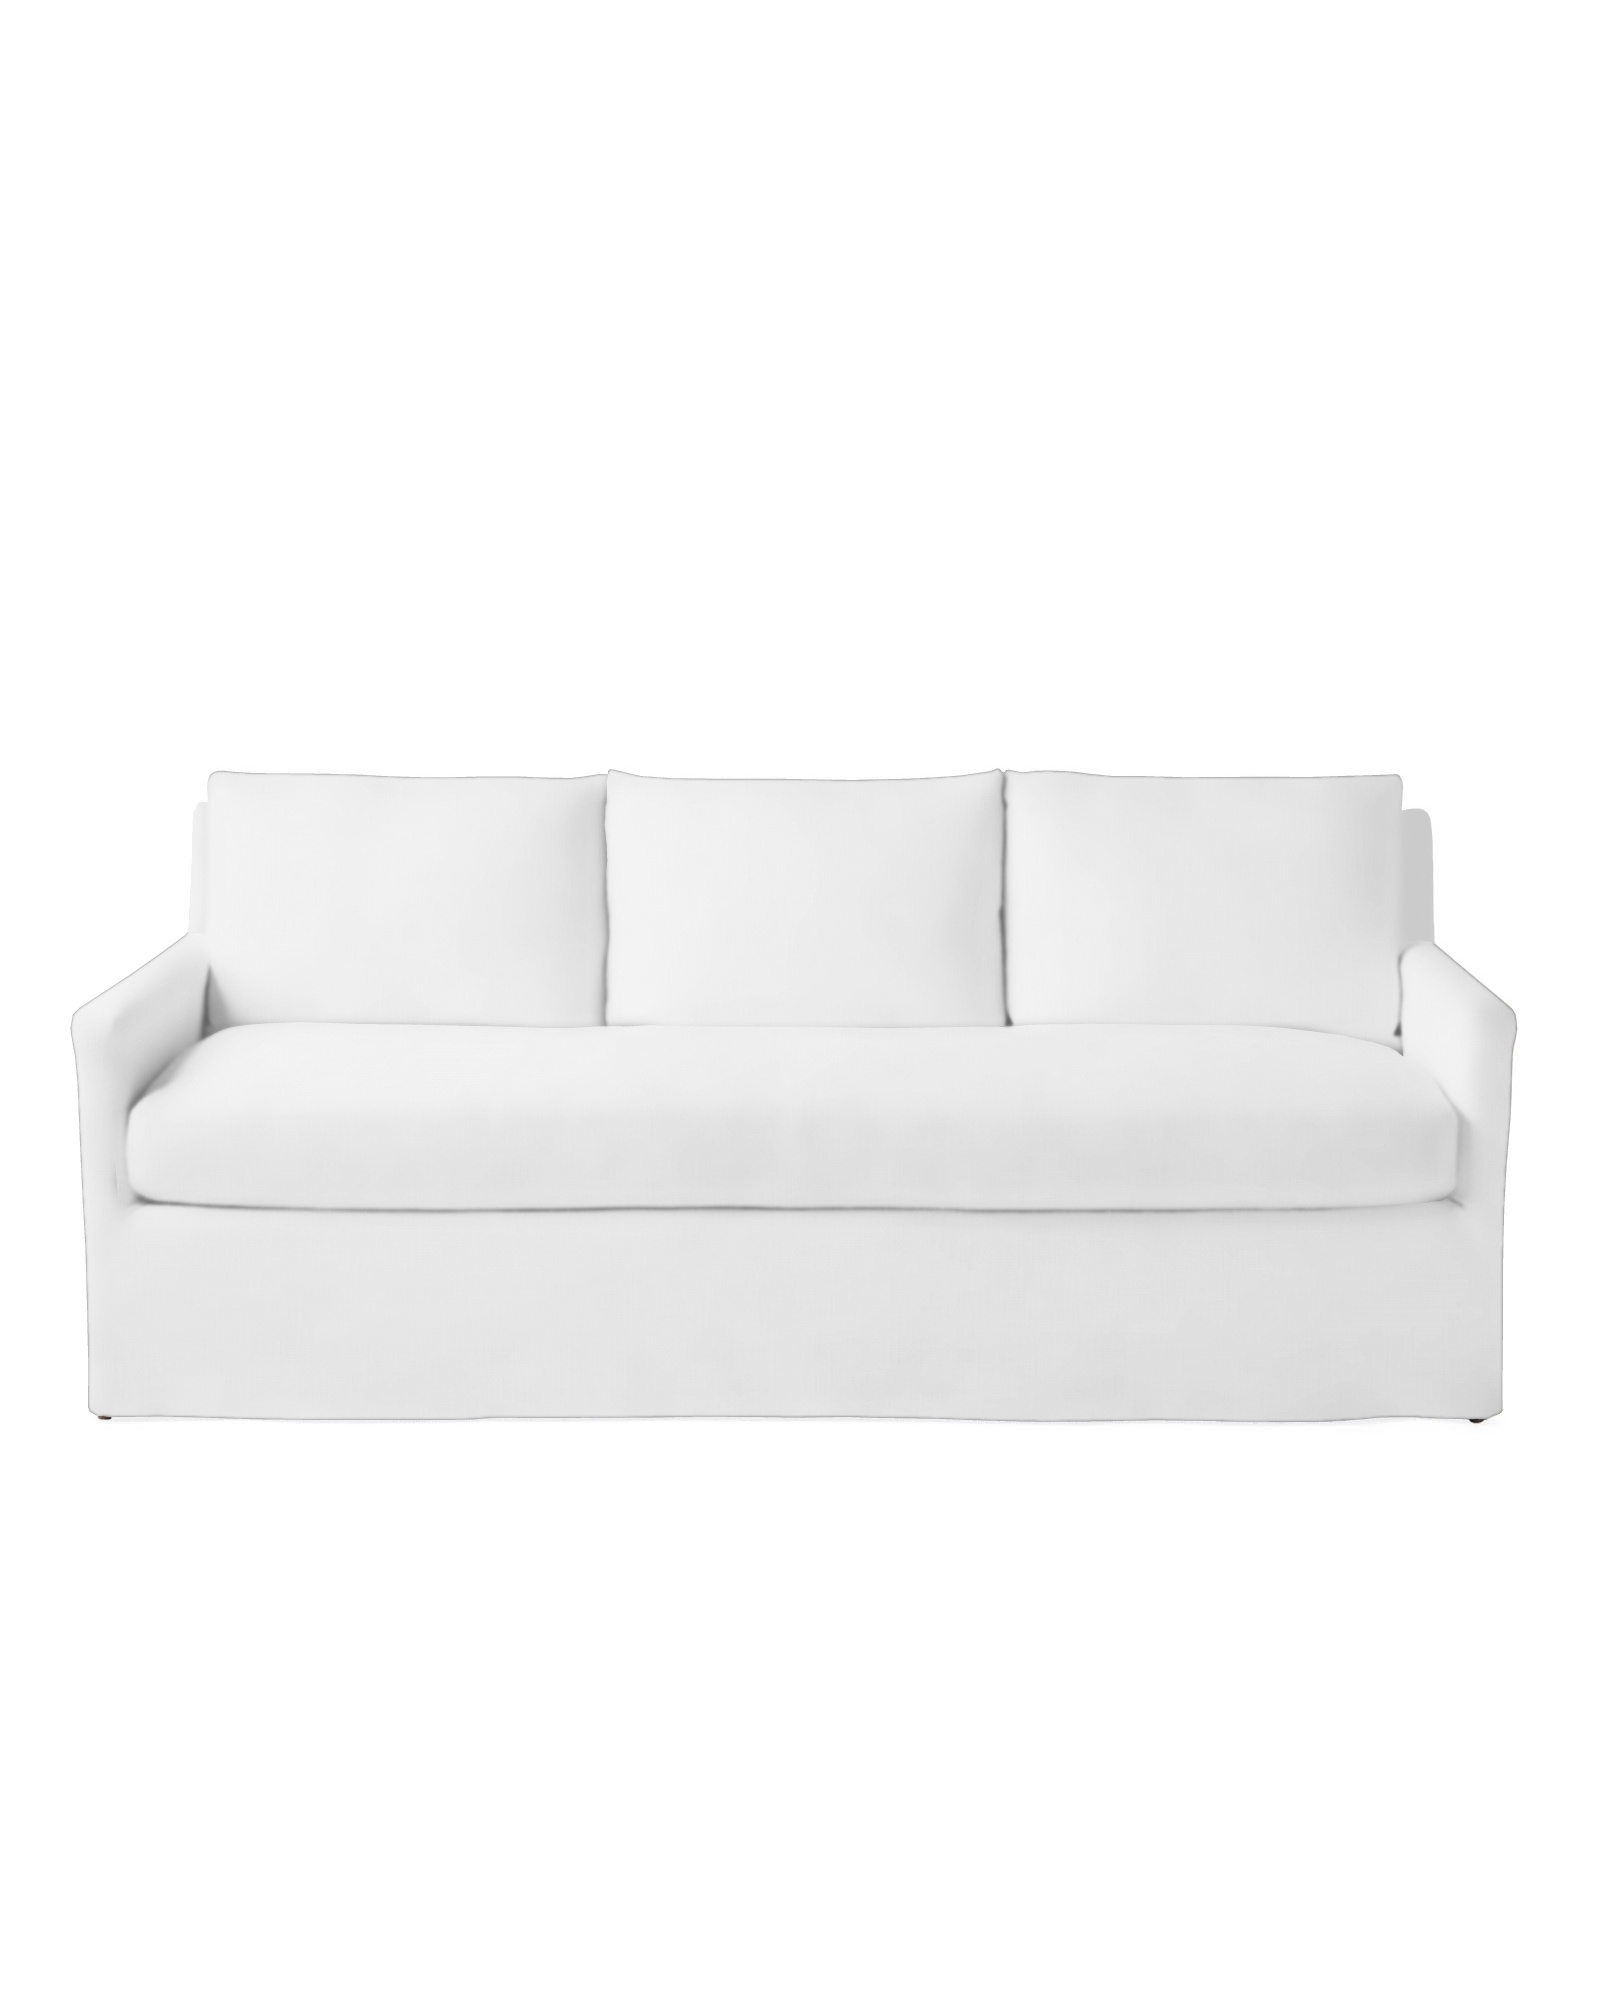 Spruce Street Stlipcovered Sofa by Serena & Lily